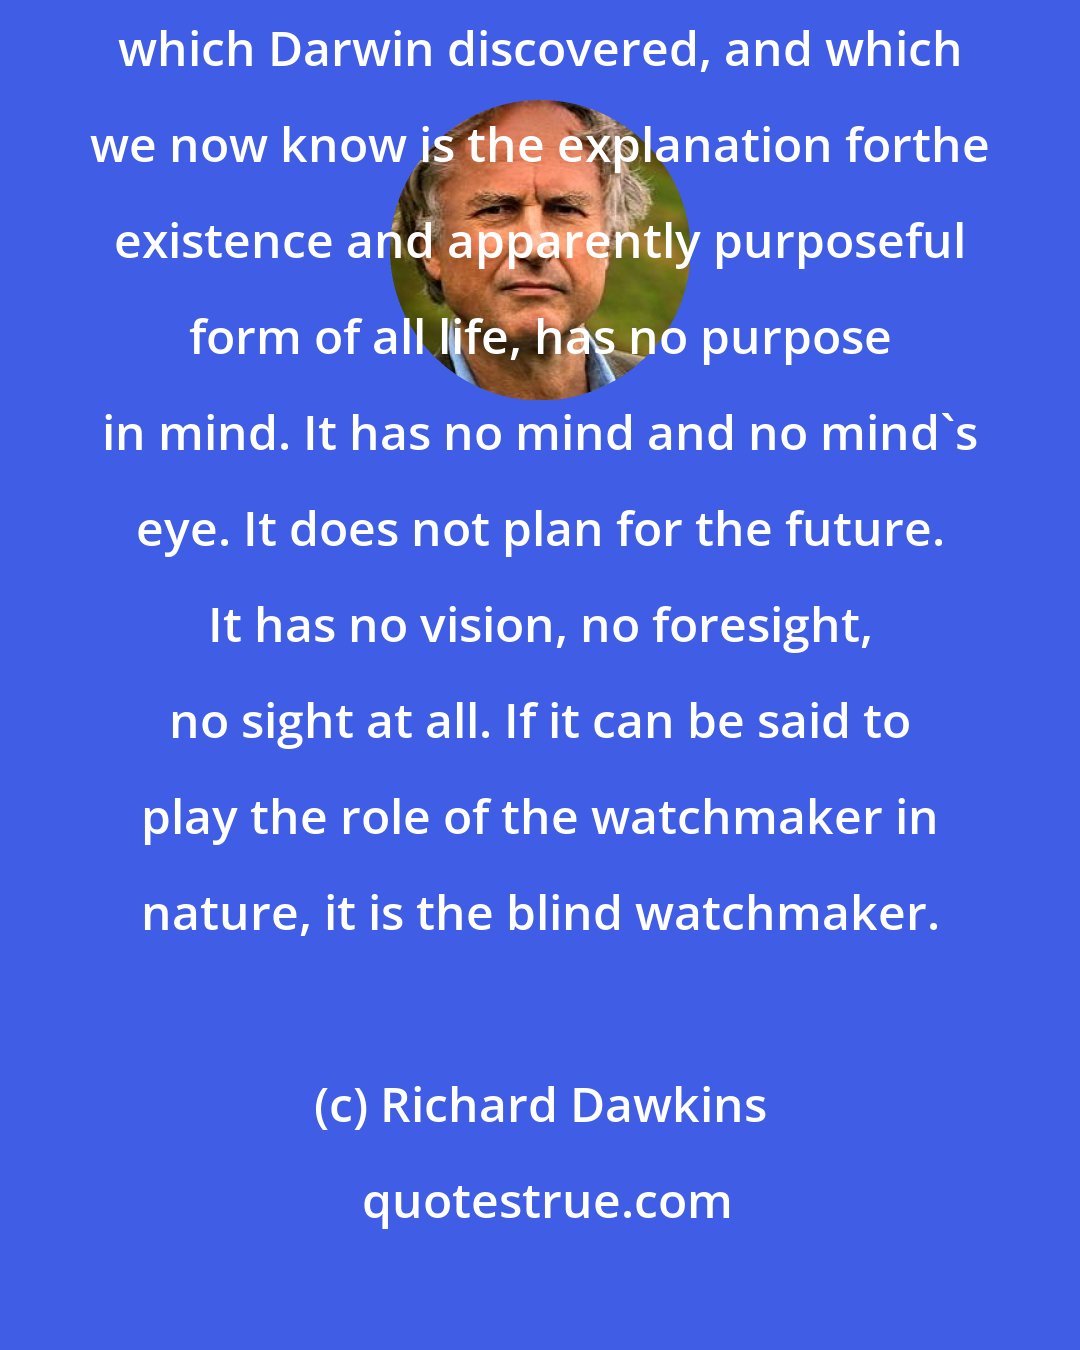 Richard Dawkins: Natural selection, the blind, unconscious, automatic process which Darwin discovered, and which we now know is the explanation forthe existence and apparently purposeful form of all life, has no purpose in mind. It has no mind and no mind's eye. It does not plan for the future. It has no vision, no foresight, no sight at all. If it can be said to play the role of the watchmaker in nature, it is the blind watchmaker.